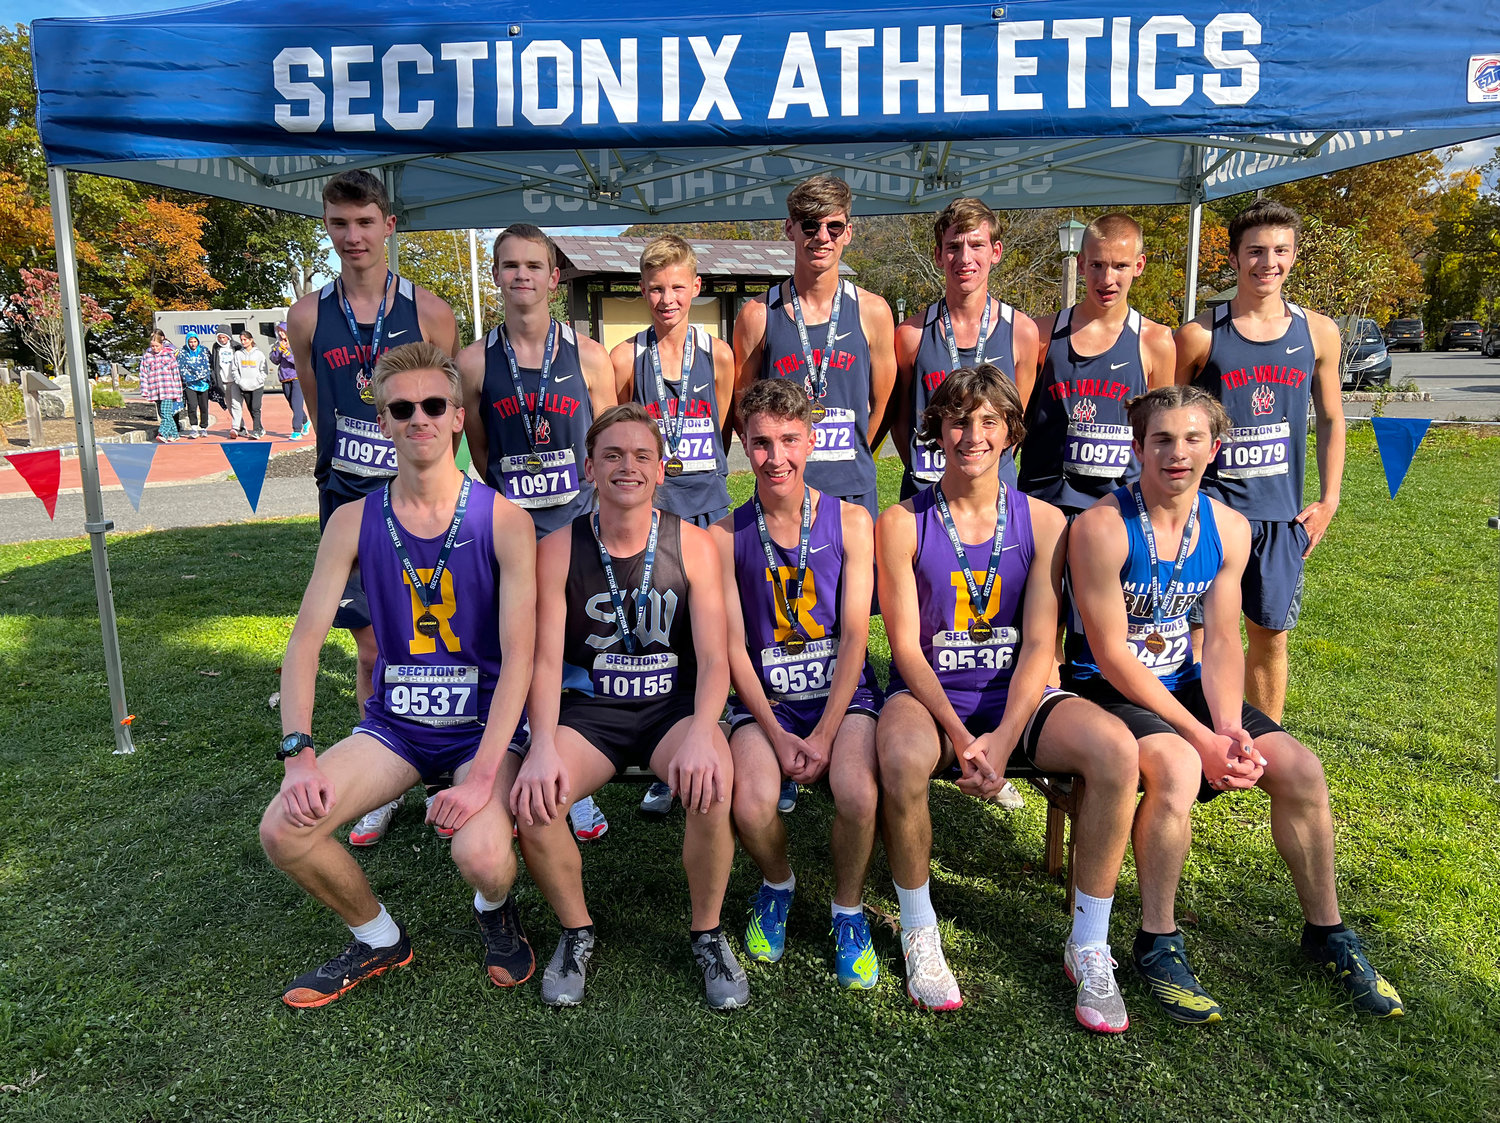 Class D winners: Back row the winning Tri-Valley team (left to right): Adam Furman, Craig Costa, Van Furman, Caleb Edwards, Vincent Mingo, Thomas Houghtaling and Connor Weyant. Front row second from left: Sullivan West’s Reece Maopolski.